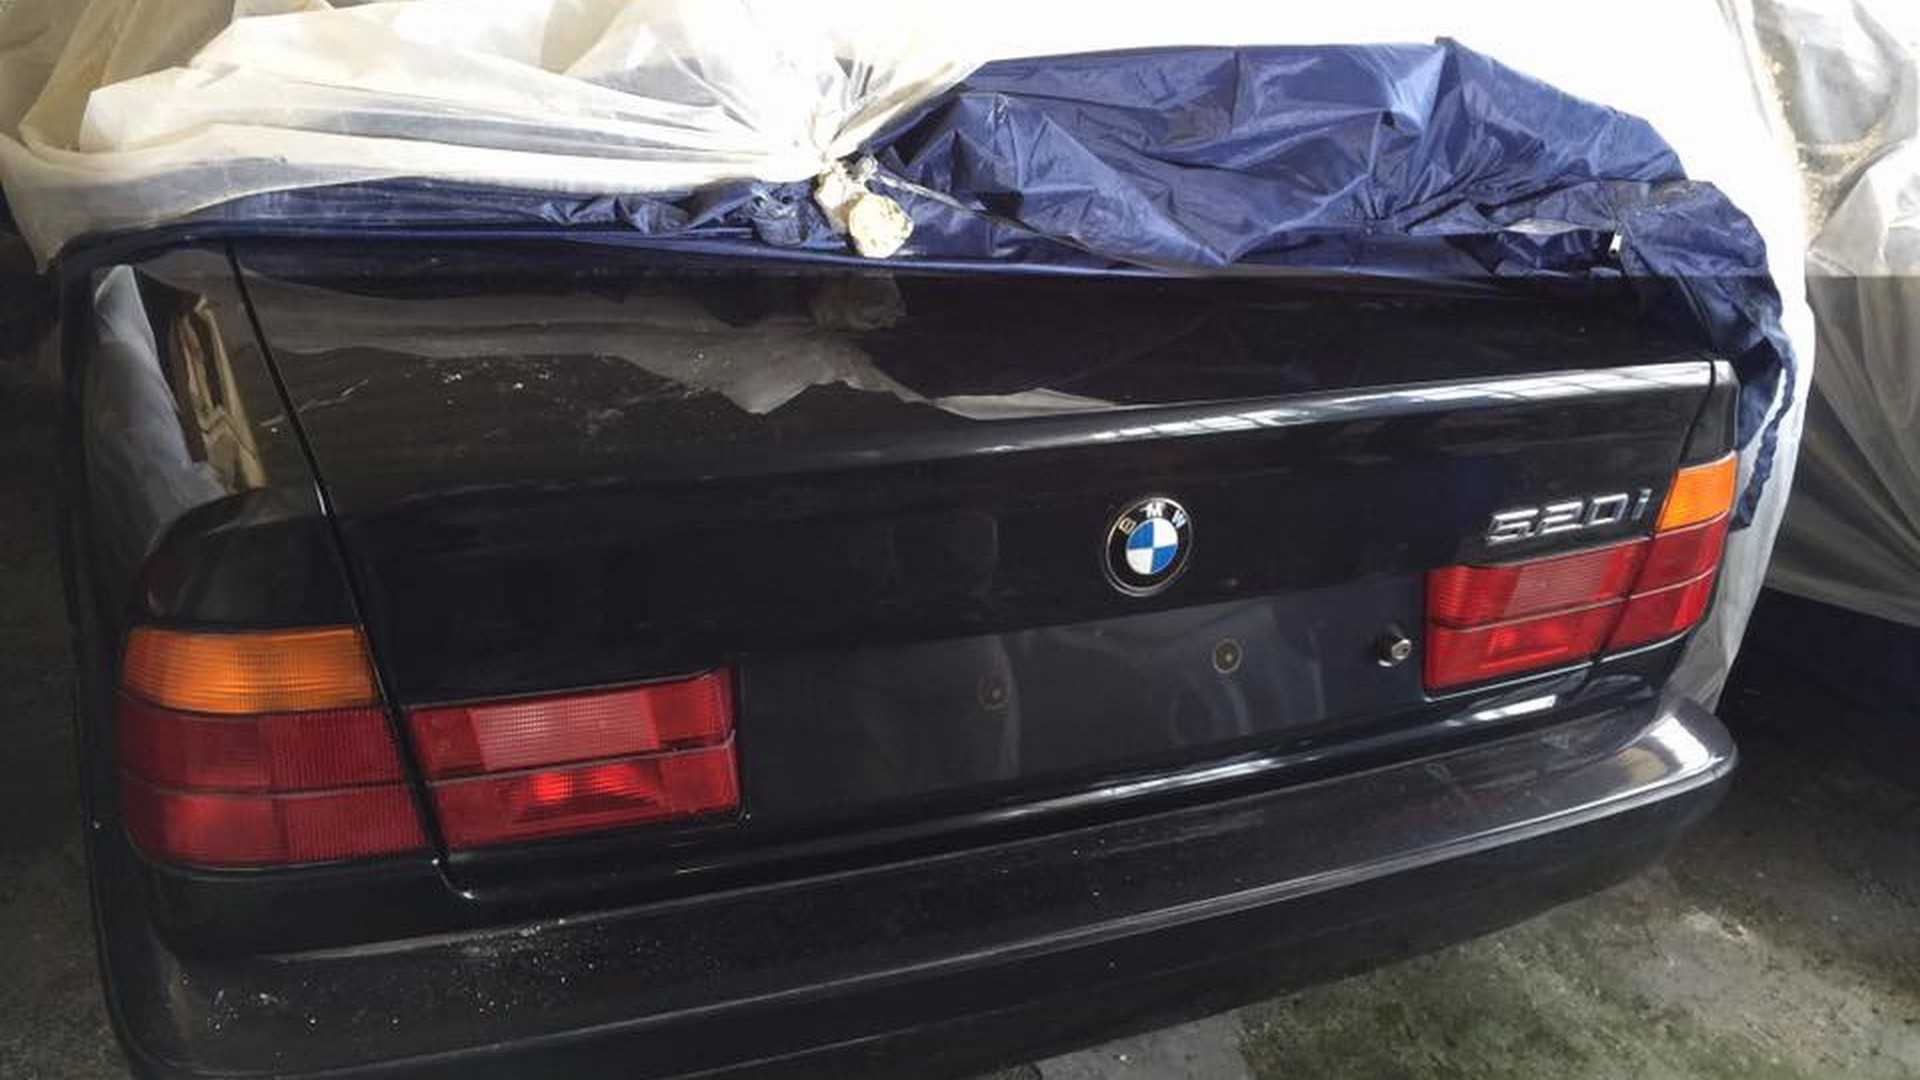 BMW 5-Series found abandoned in Bulgaria